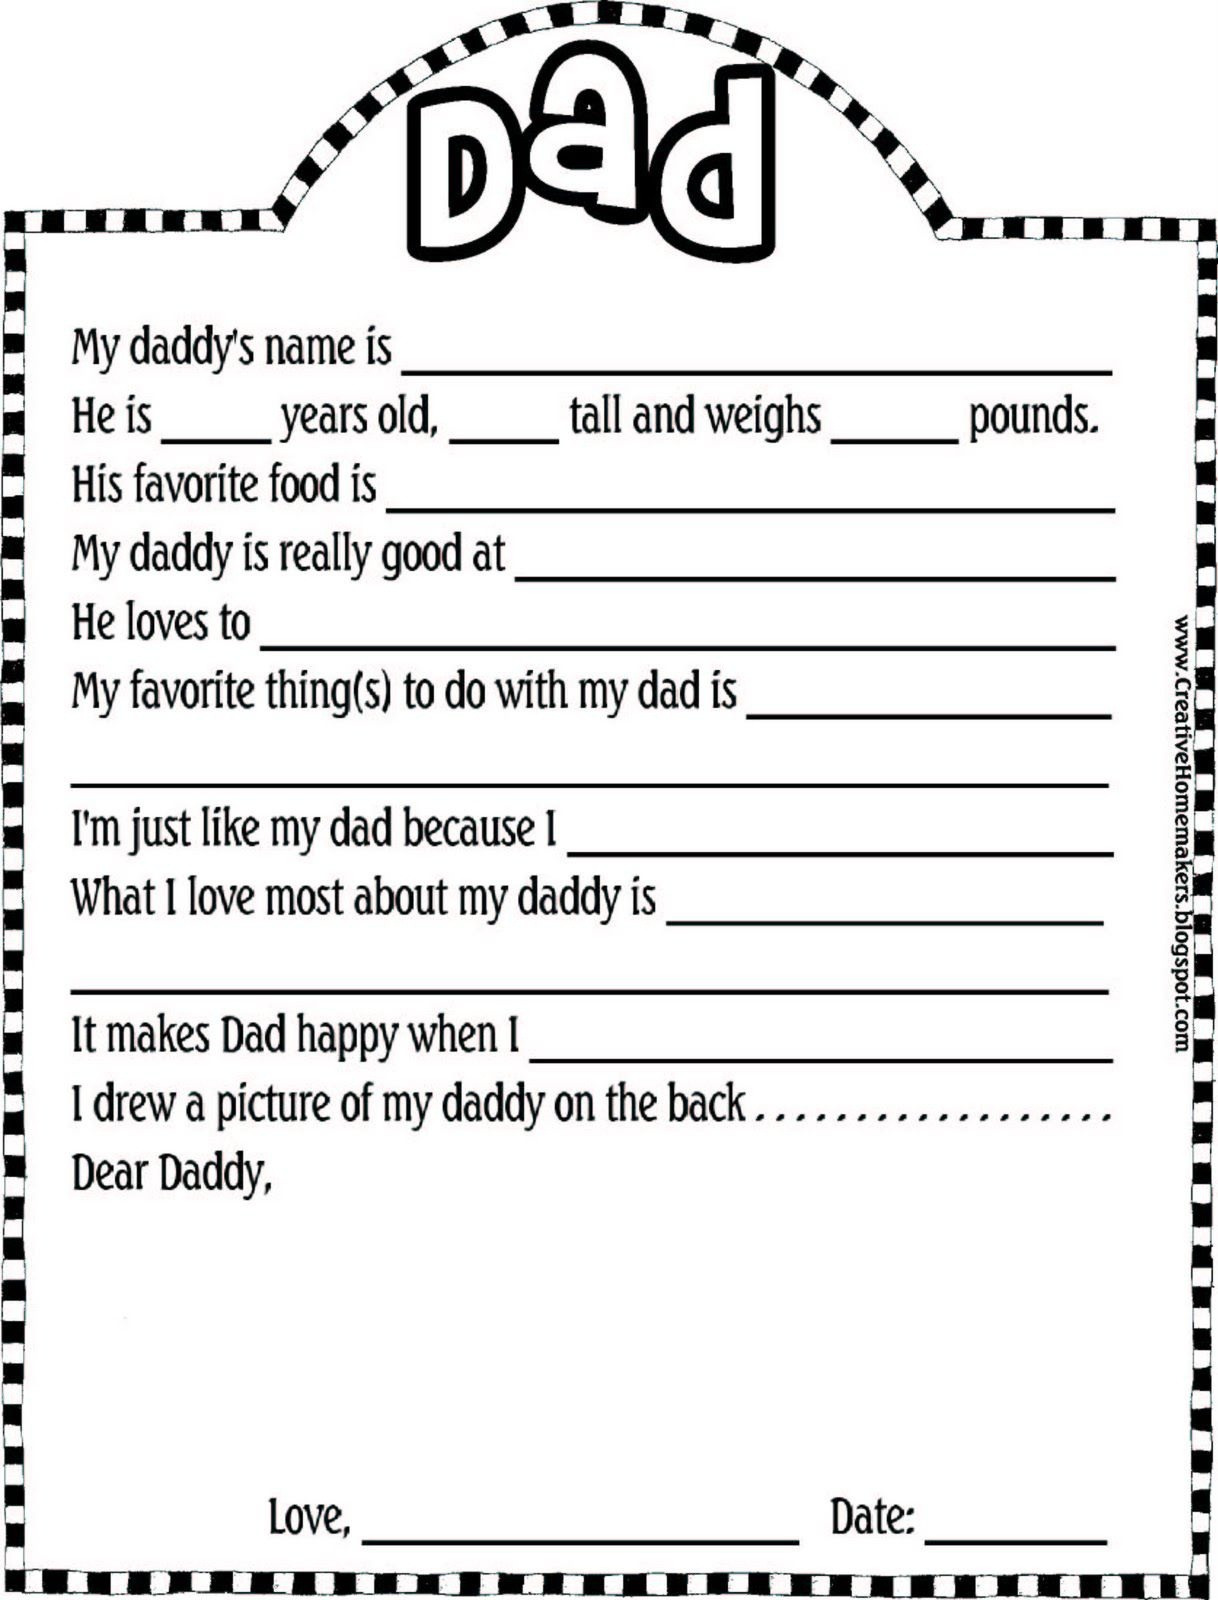 Free Father&amp;#039;s Day Printable From The Creative Homemaker | Father&amp;#039;s - Free Printable Dad Questionnaire